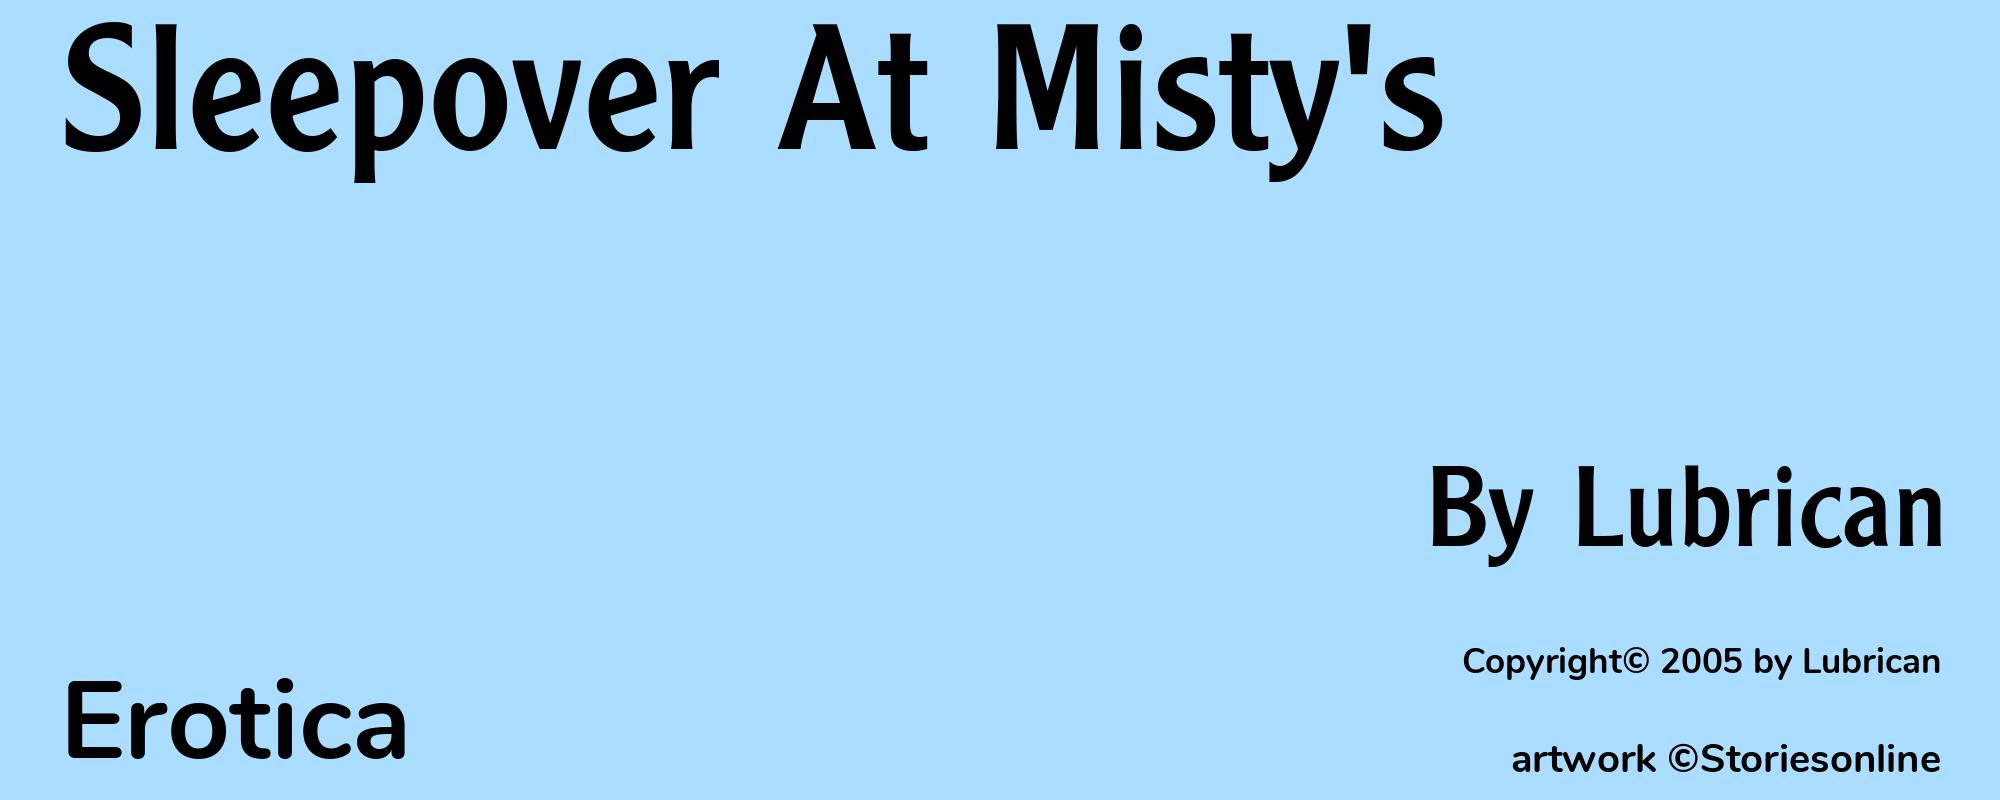 Sleepover At Misty's - Cover